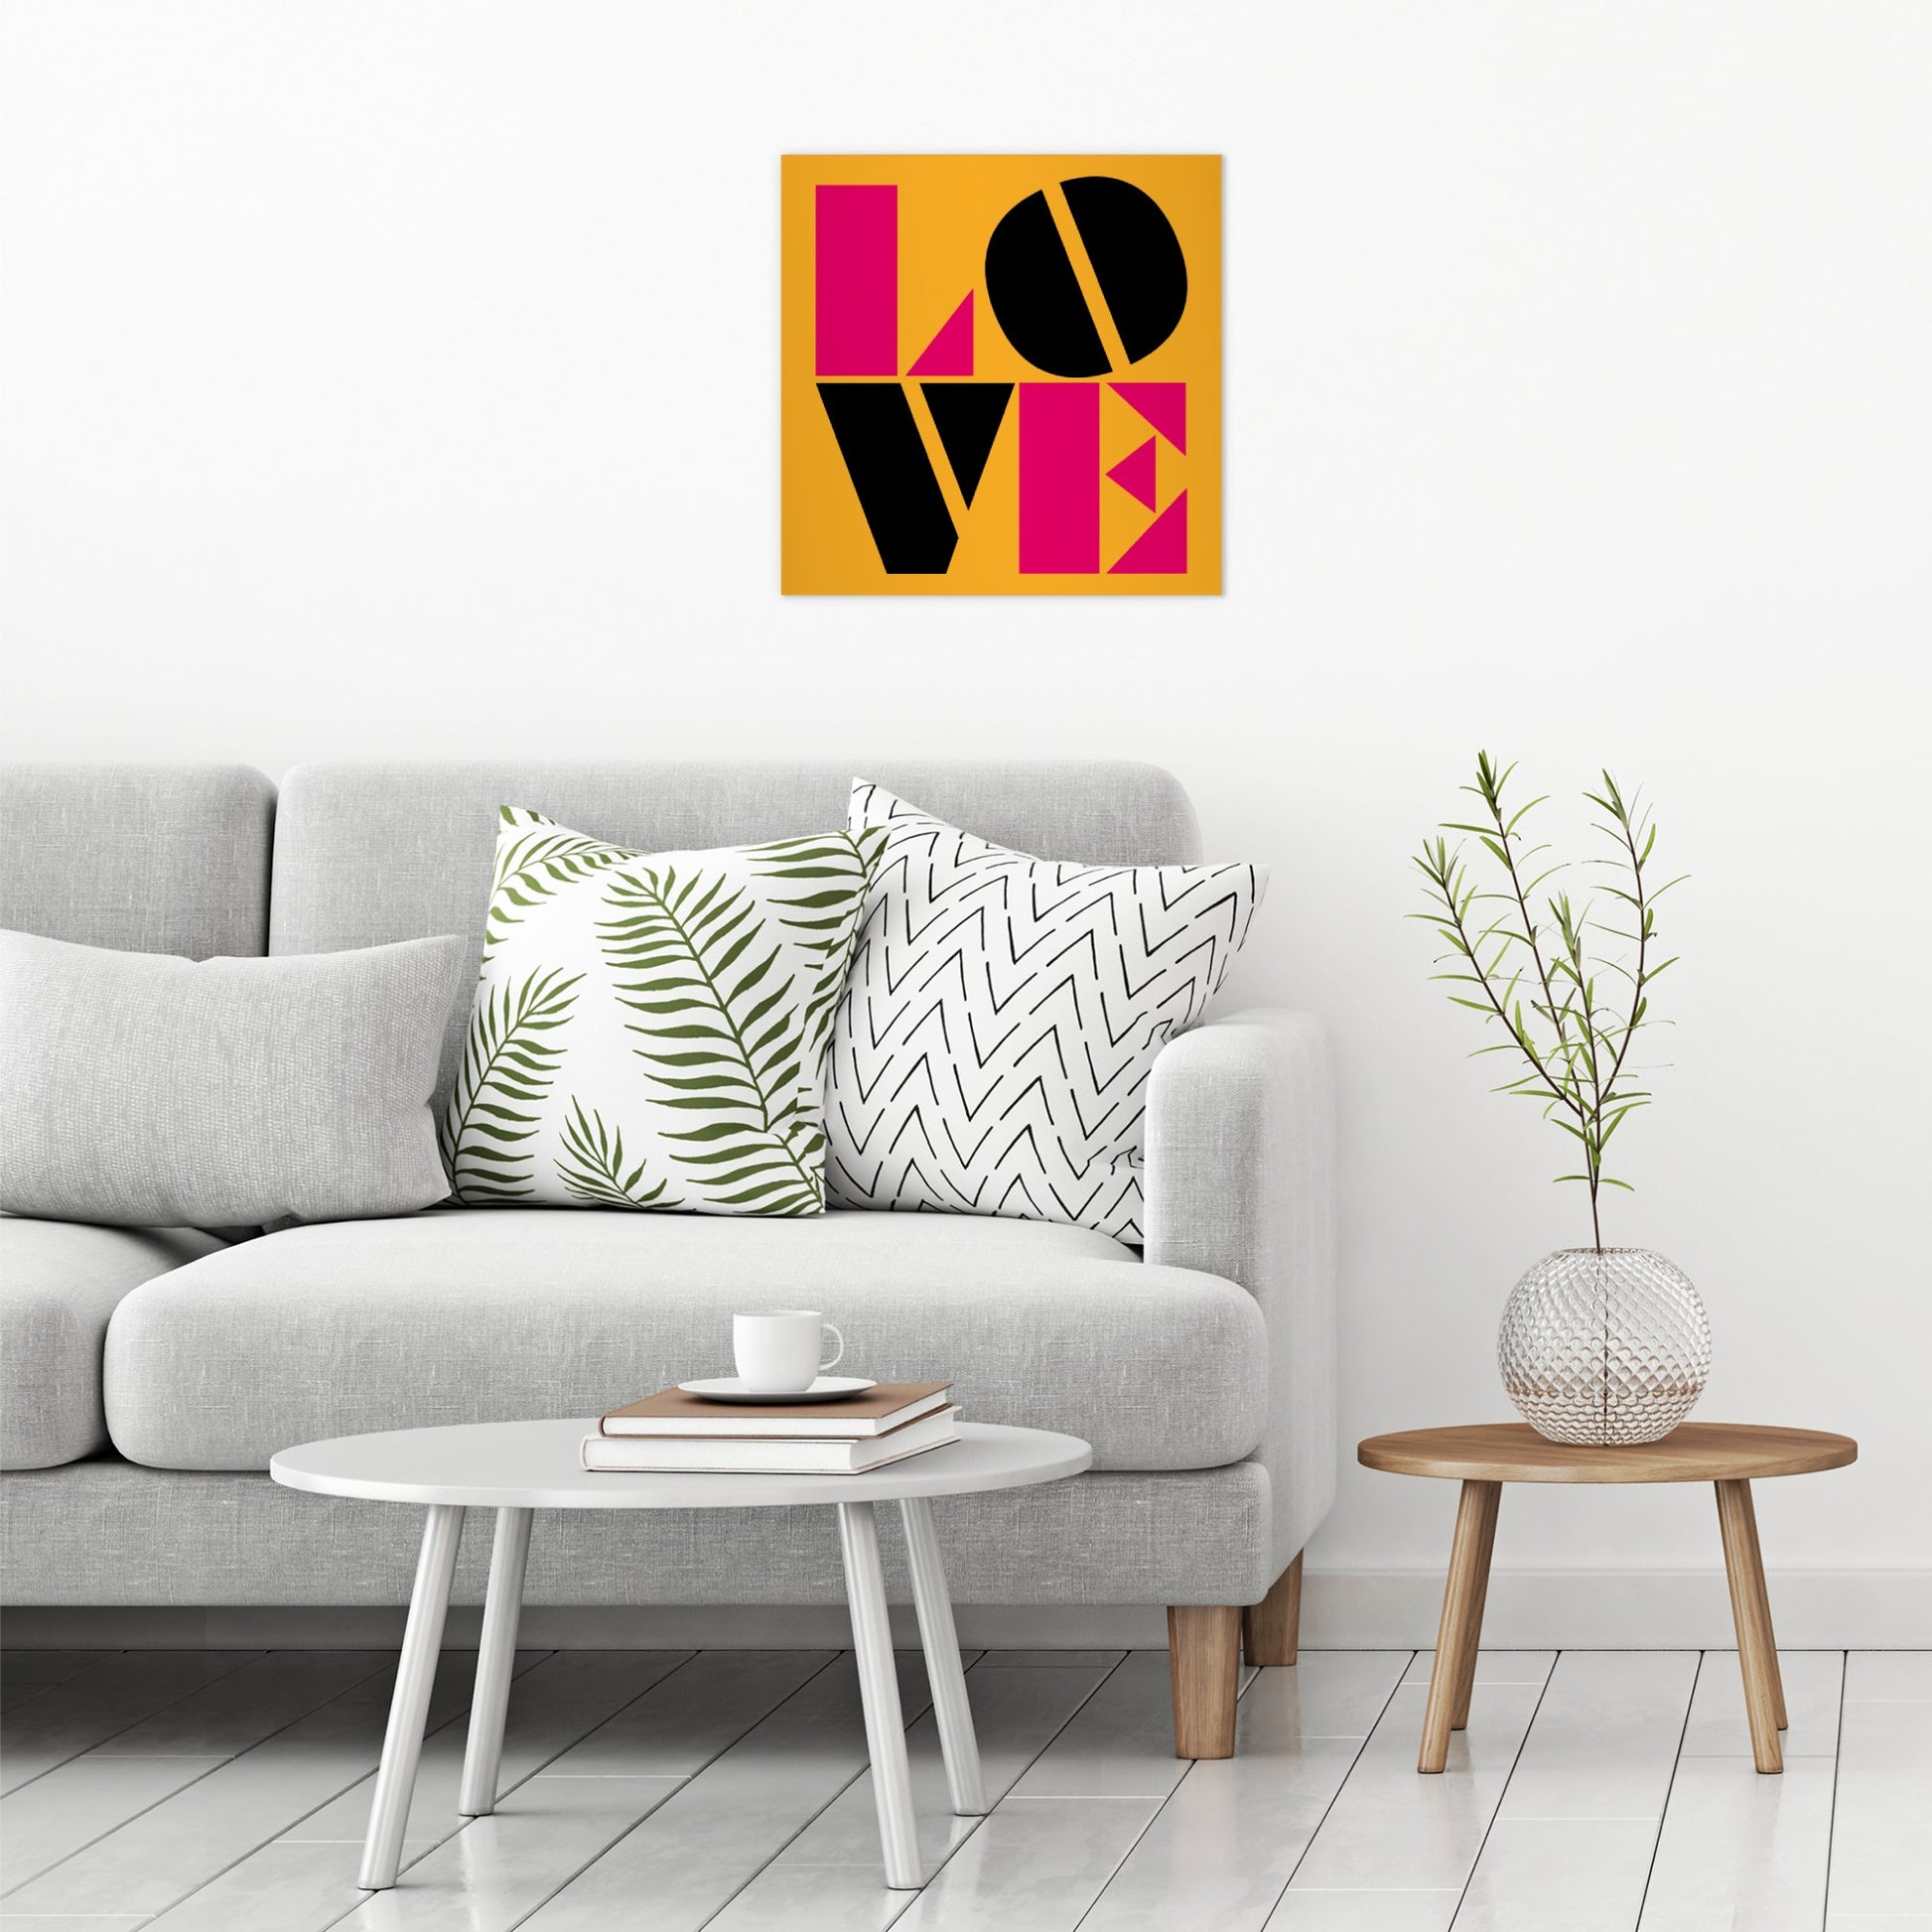 A contemporary modern room view showing a large size metal art poster display plate with printed design of a Typographic Love Design